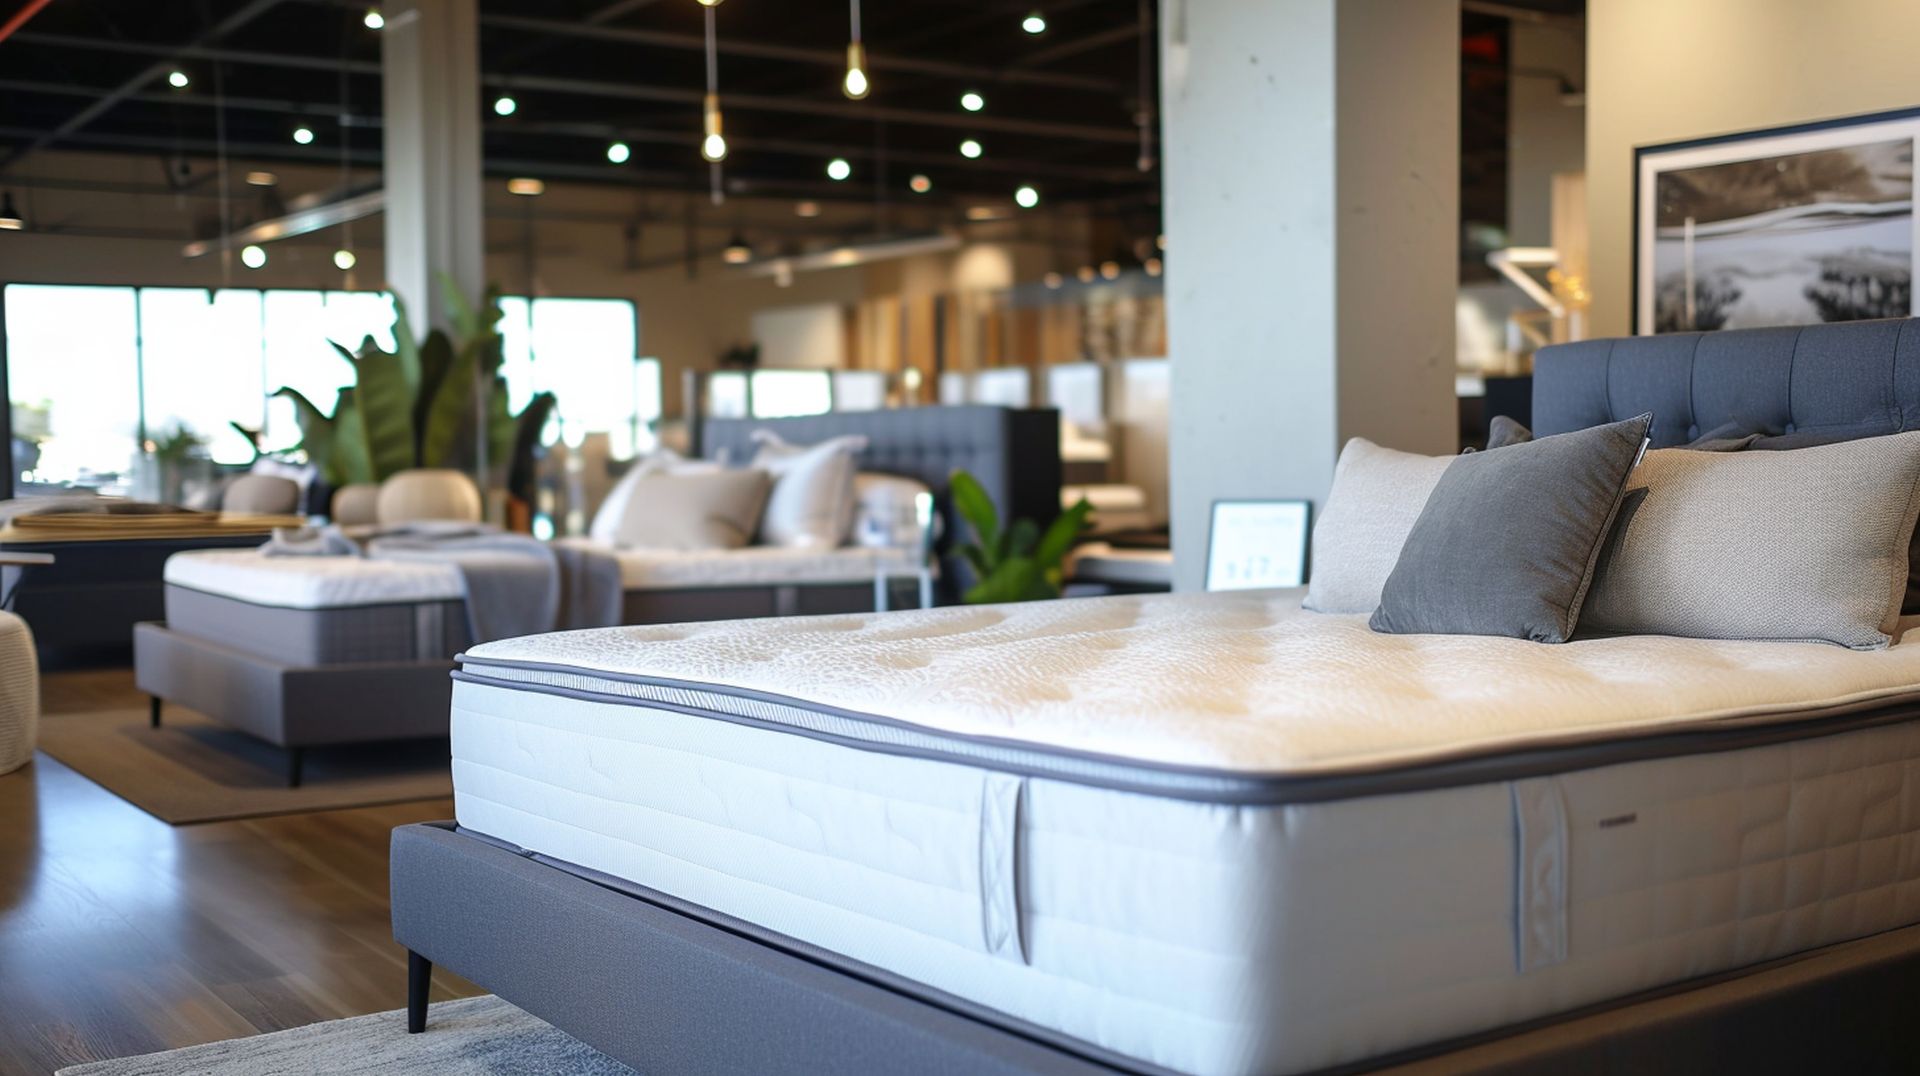 Types of mattresses at mattress dealers in Eugene, OR